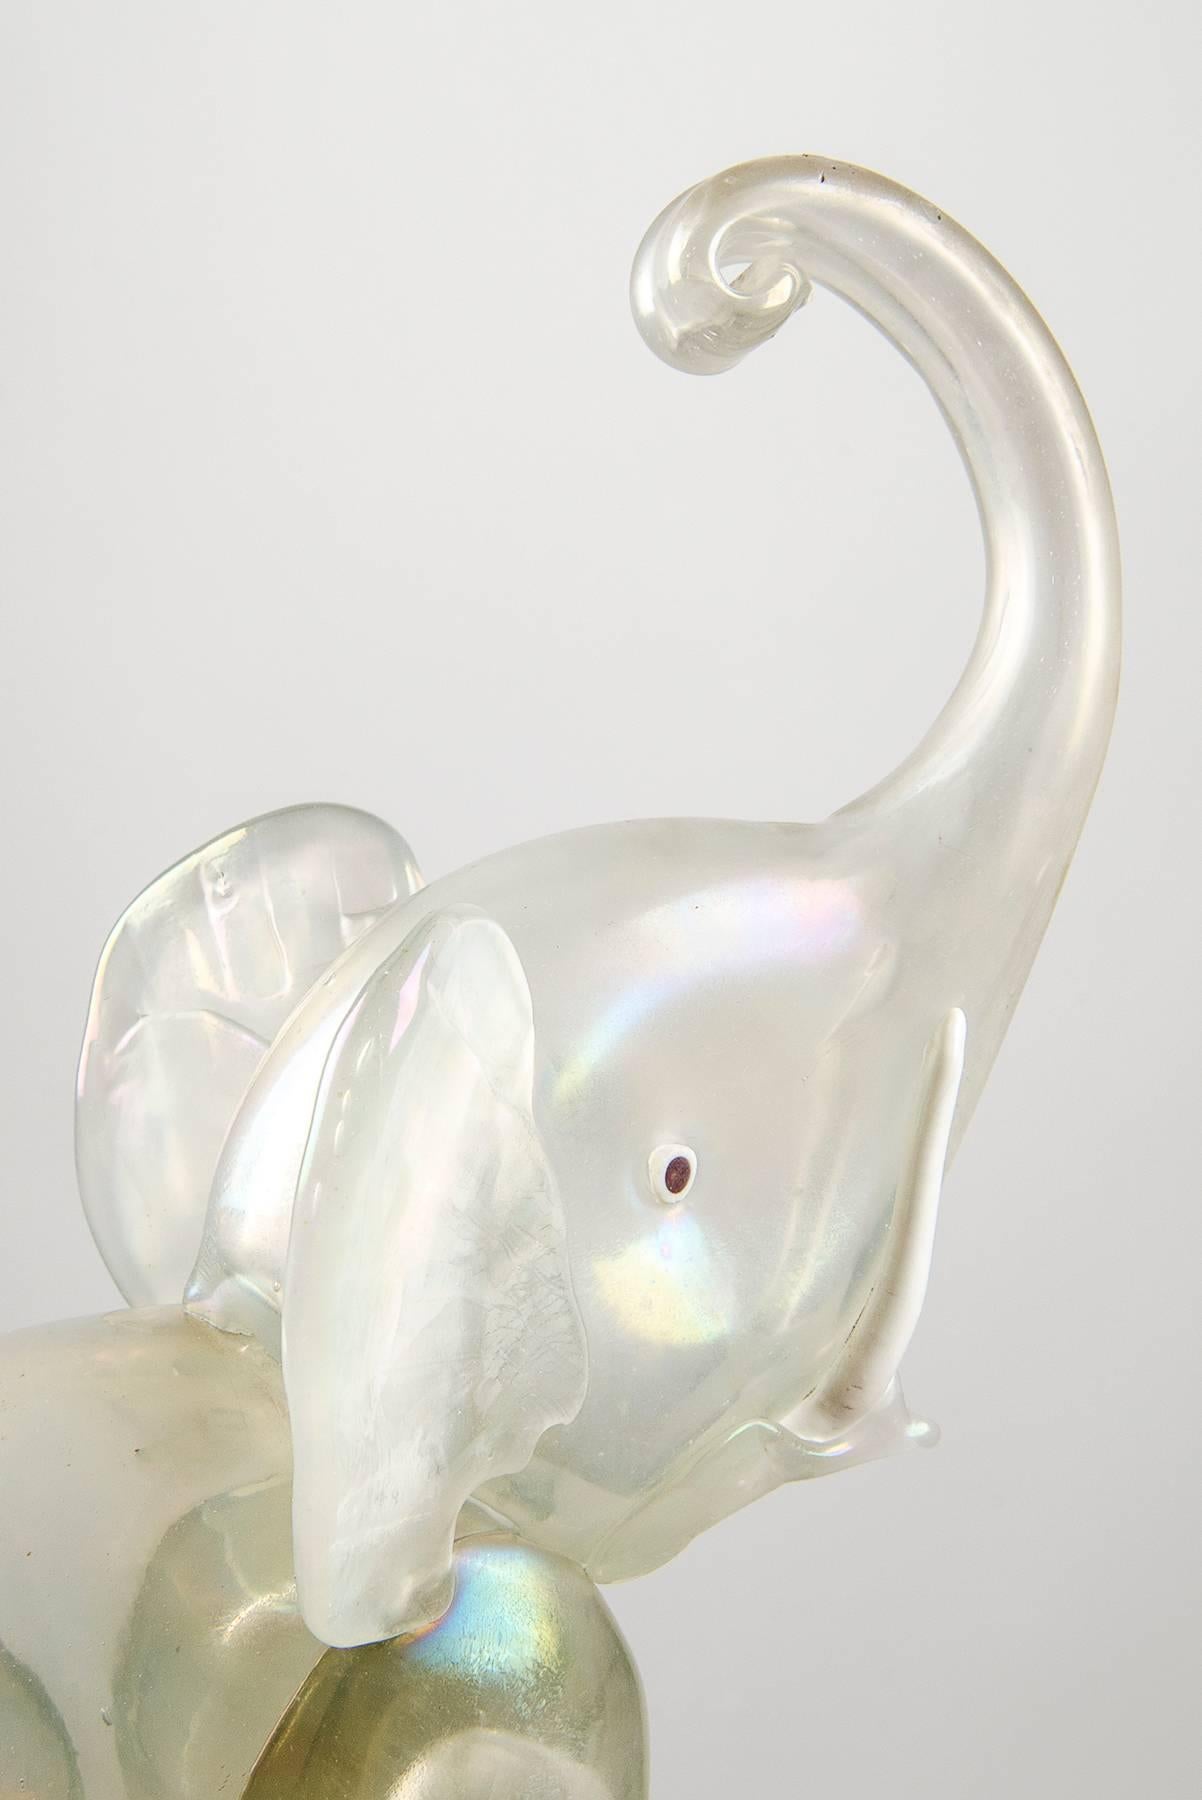 Exquisitely made Murano glass elephant sculpture, probably one of Barovier&Toso or Seguso's creations from the early 1930s.  Charming translucent and iridescent glass. Good vintage conditions, just a few minor losses on the tail on one leg to